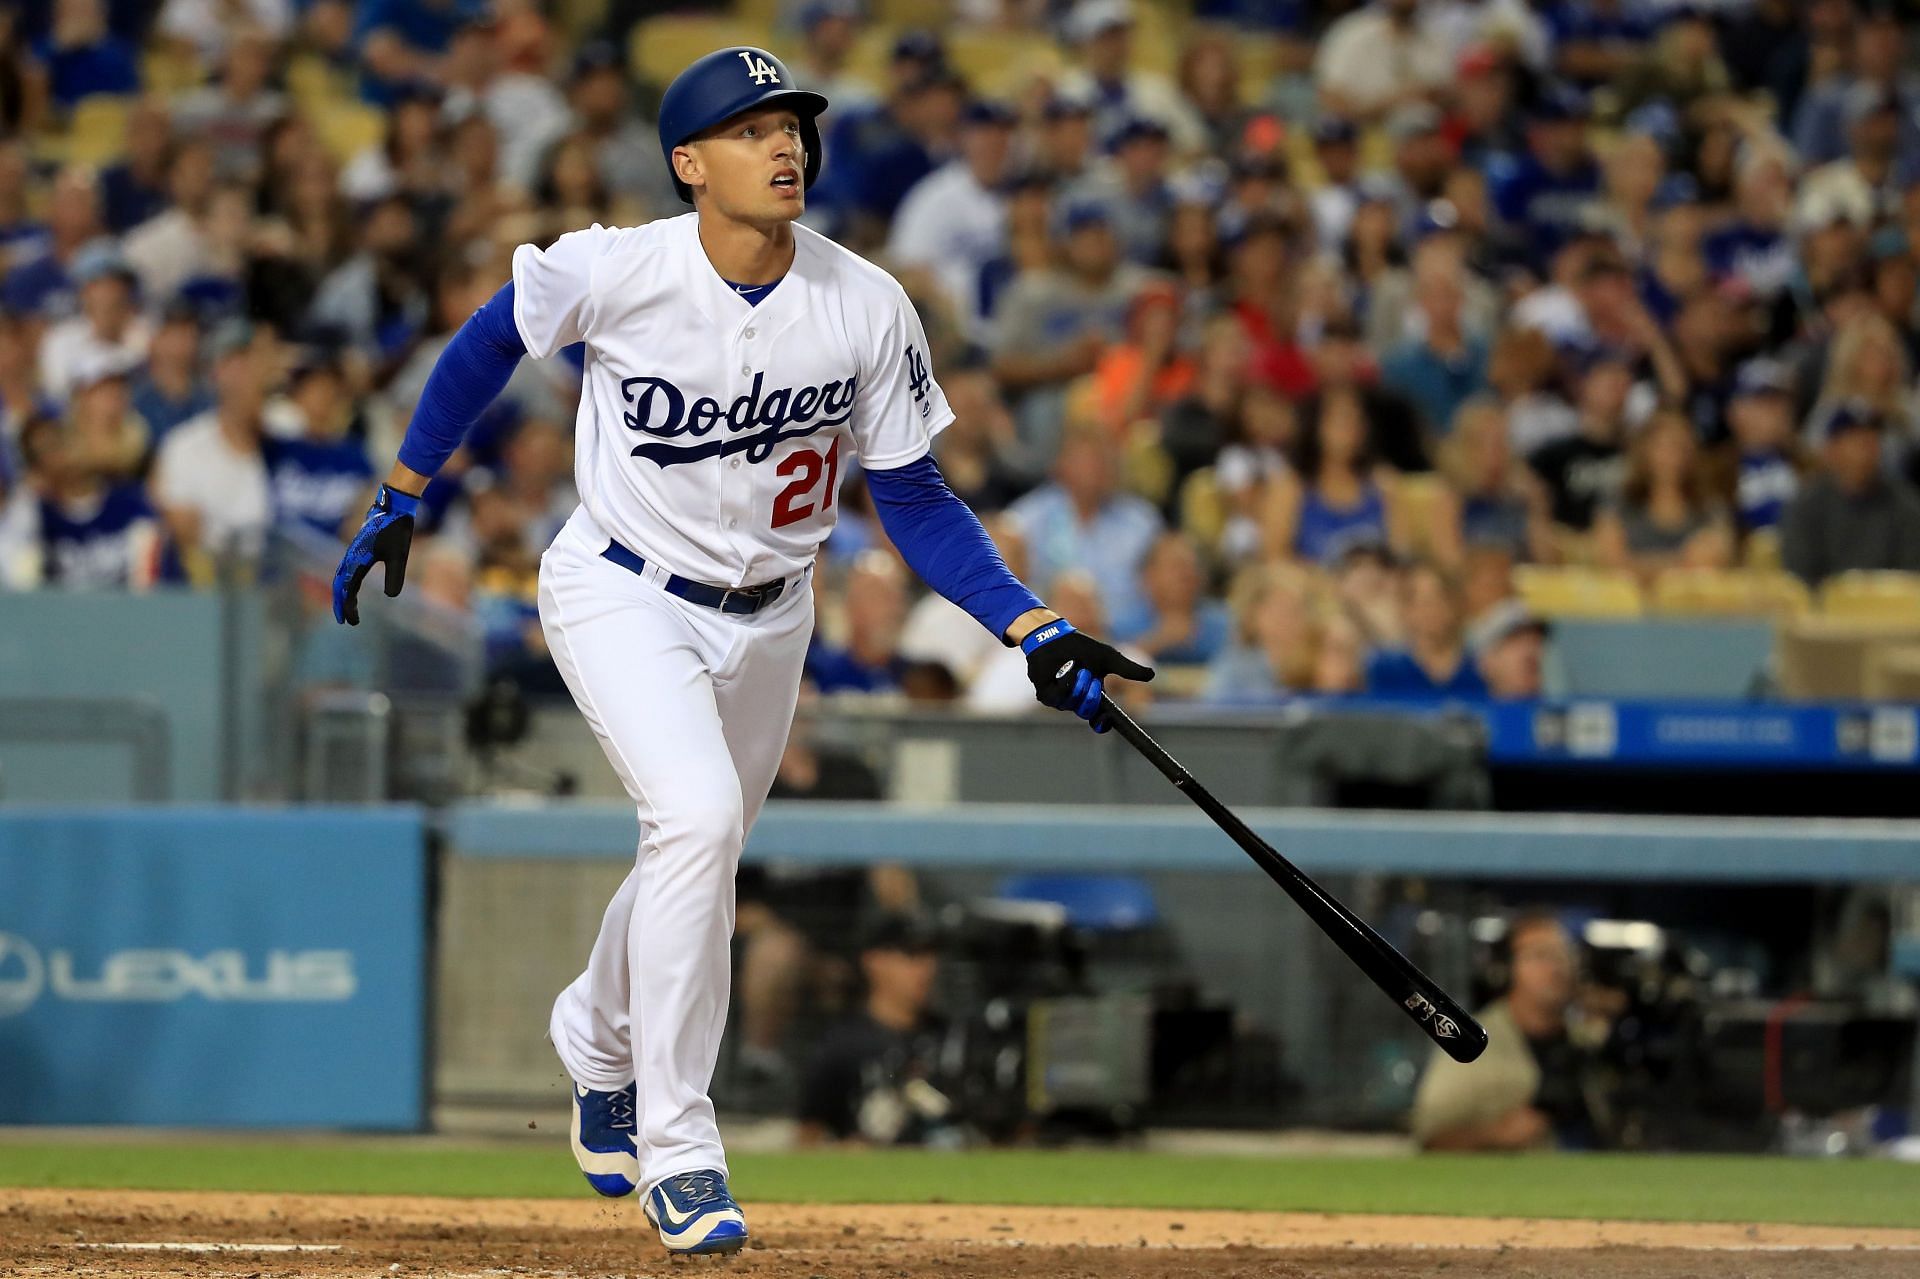 Dodgers trade for outfielder Trayce Thompson after Mookie Betts injury